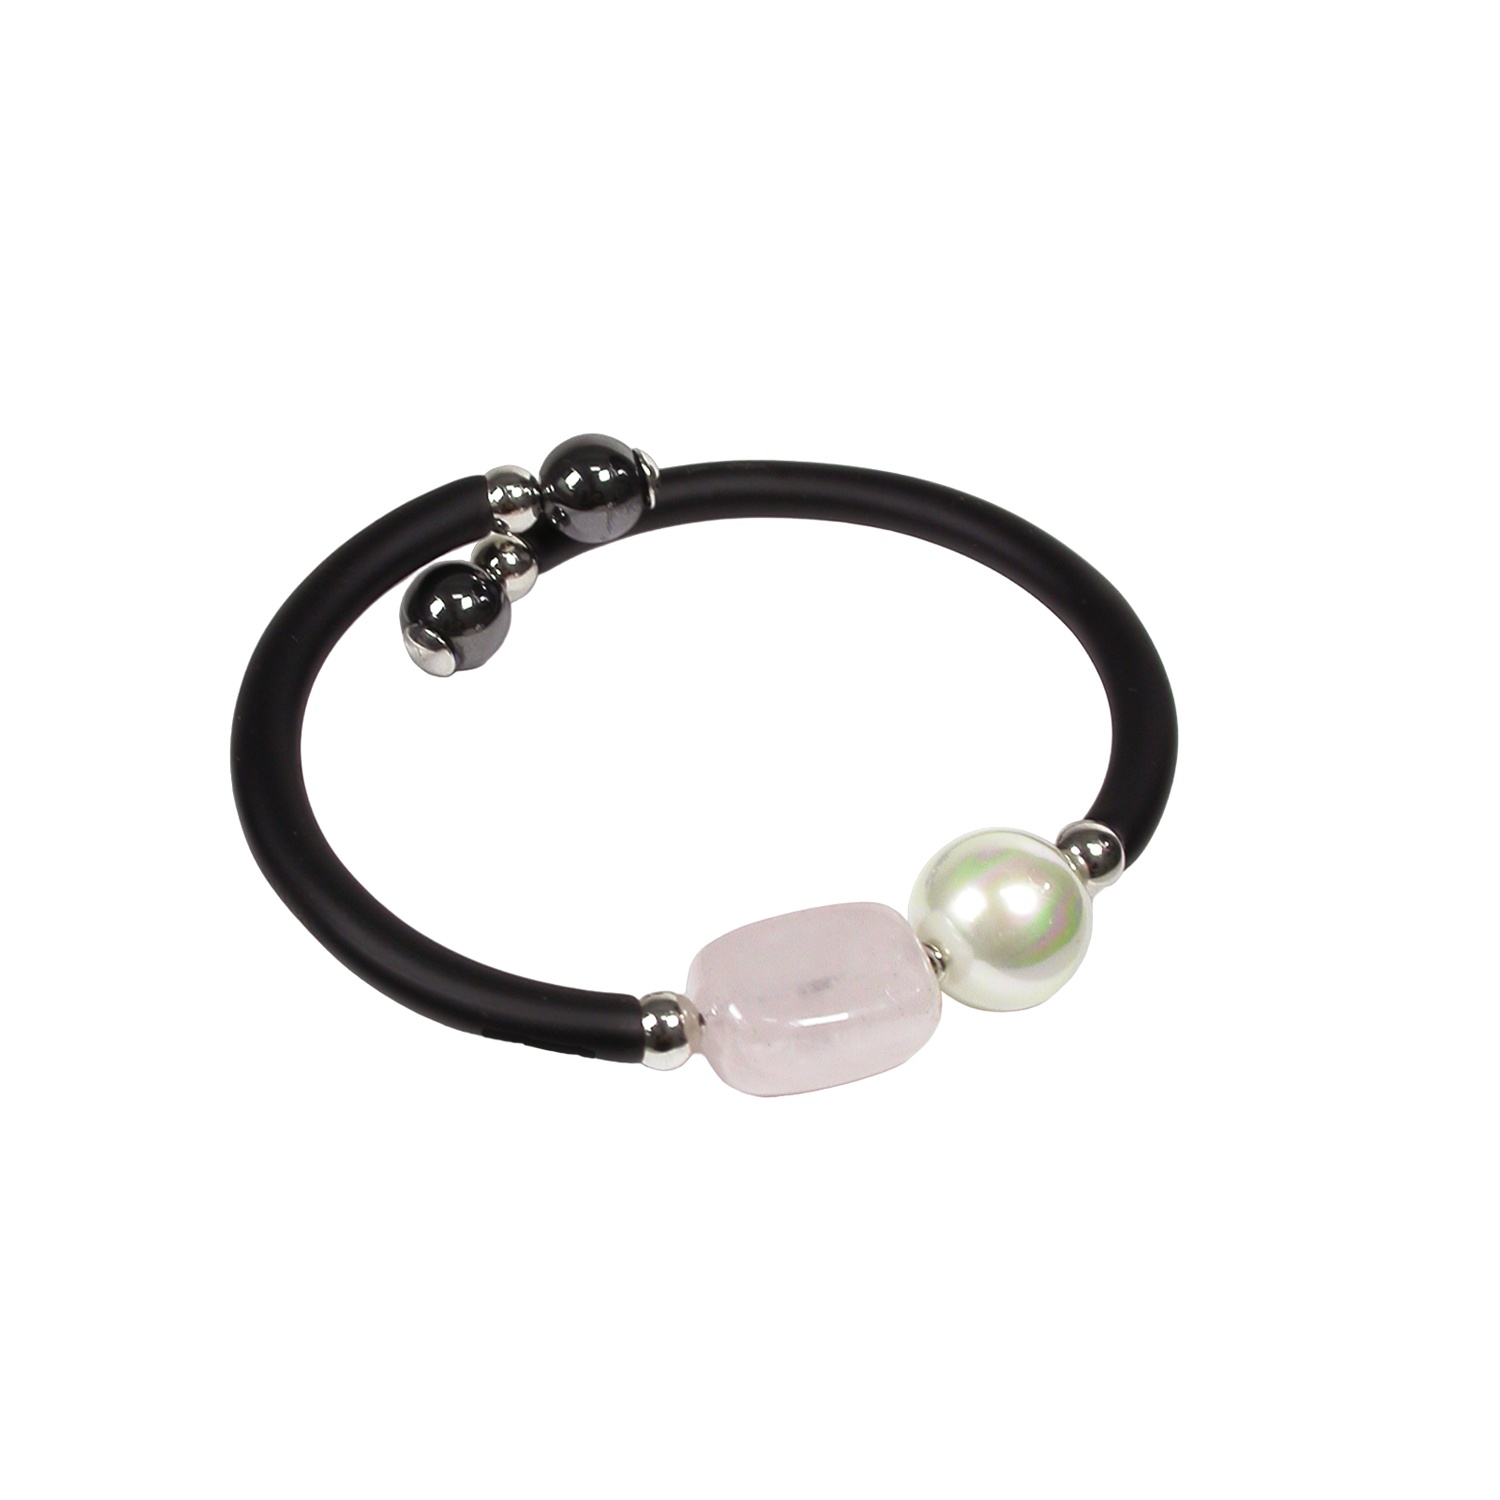 Rubber Necklace with Pearl and Rose Quartz stone